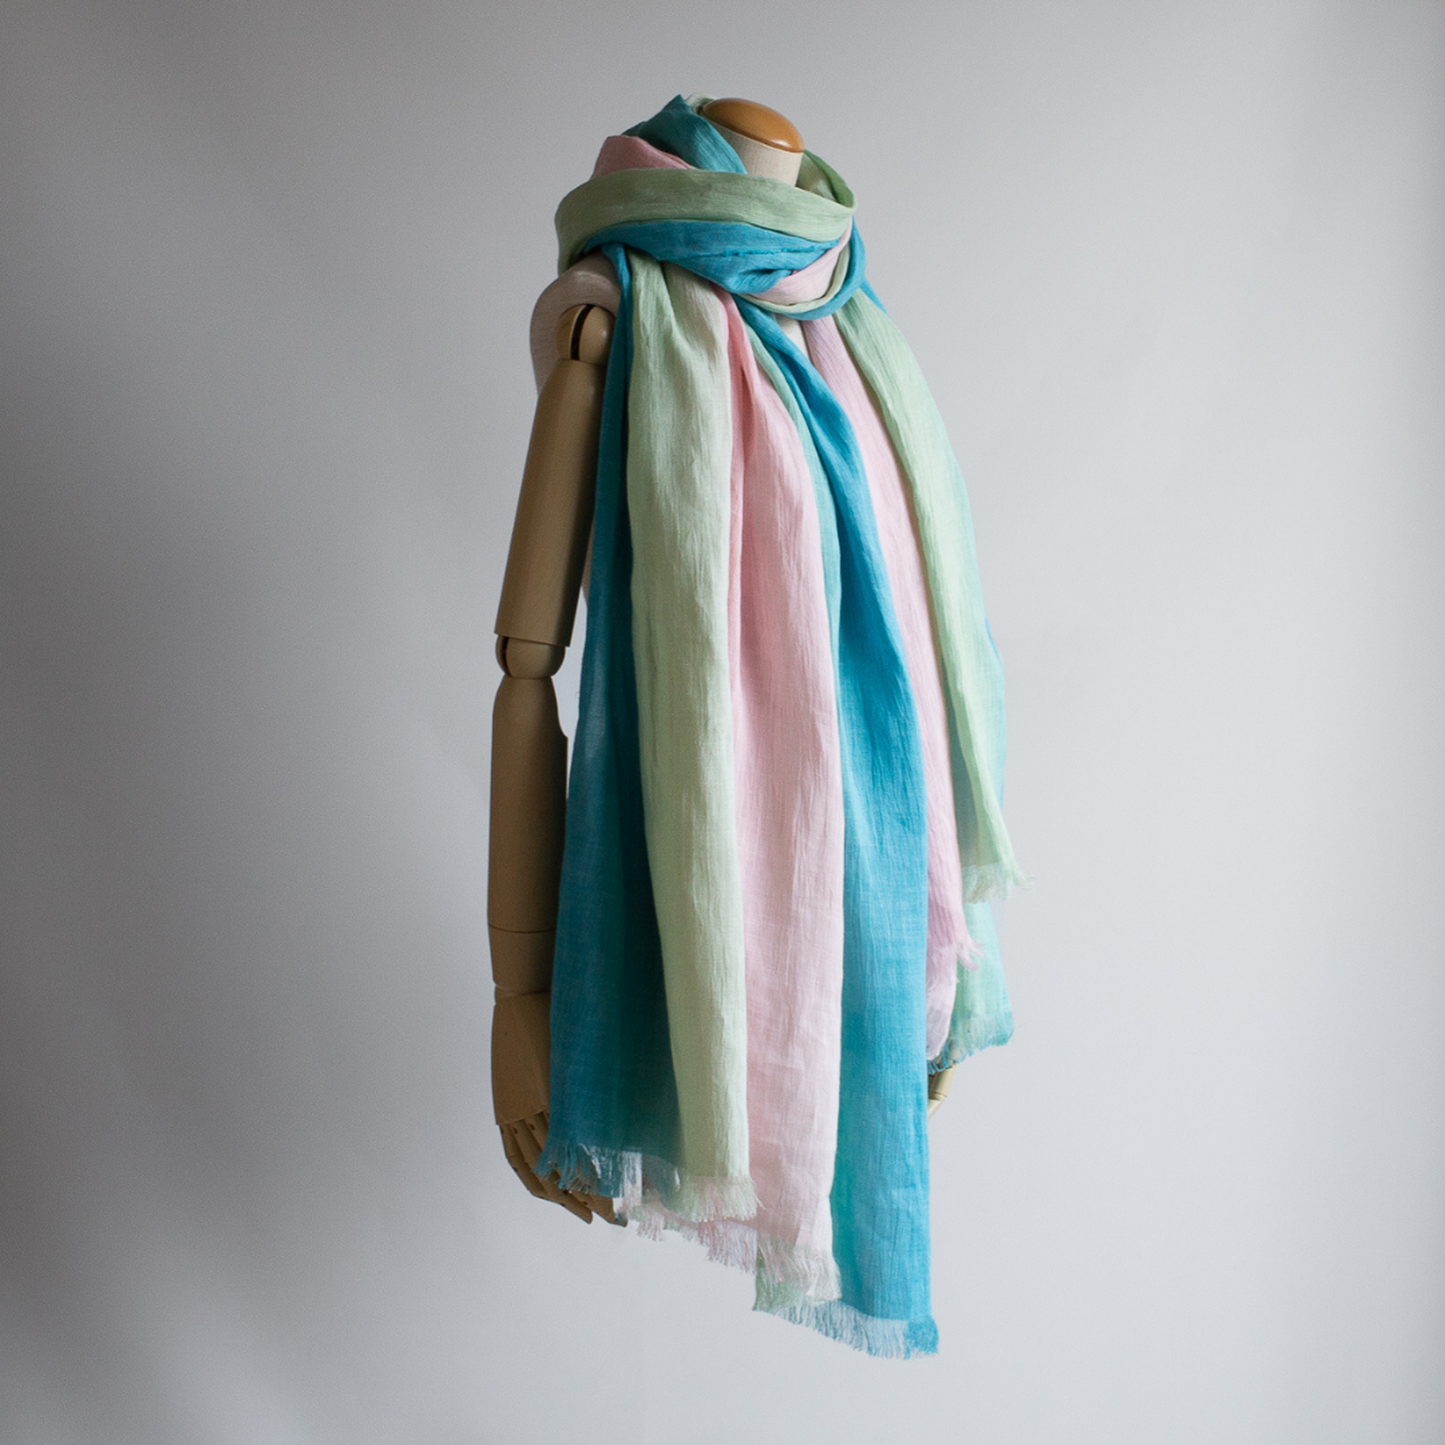 Hand-rolled Linen Yoryu Gradation Primavera Large Scarf Omi Chijimi Hand-dyed Long Scarf -SG01